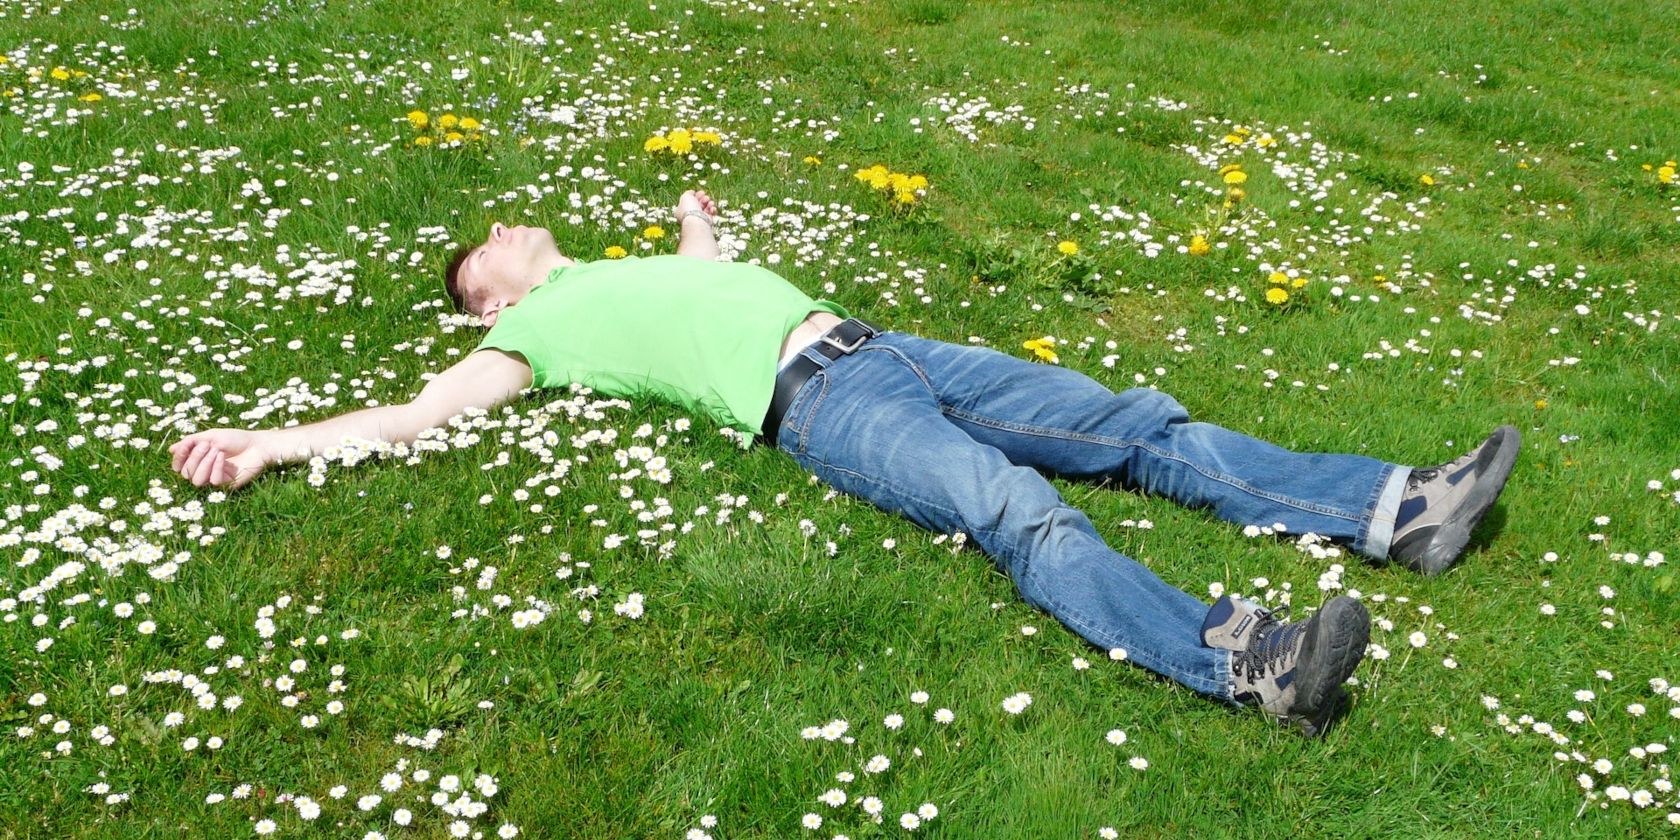 High Angle View of a man Lying Down on Grass